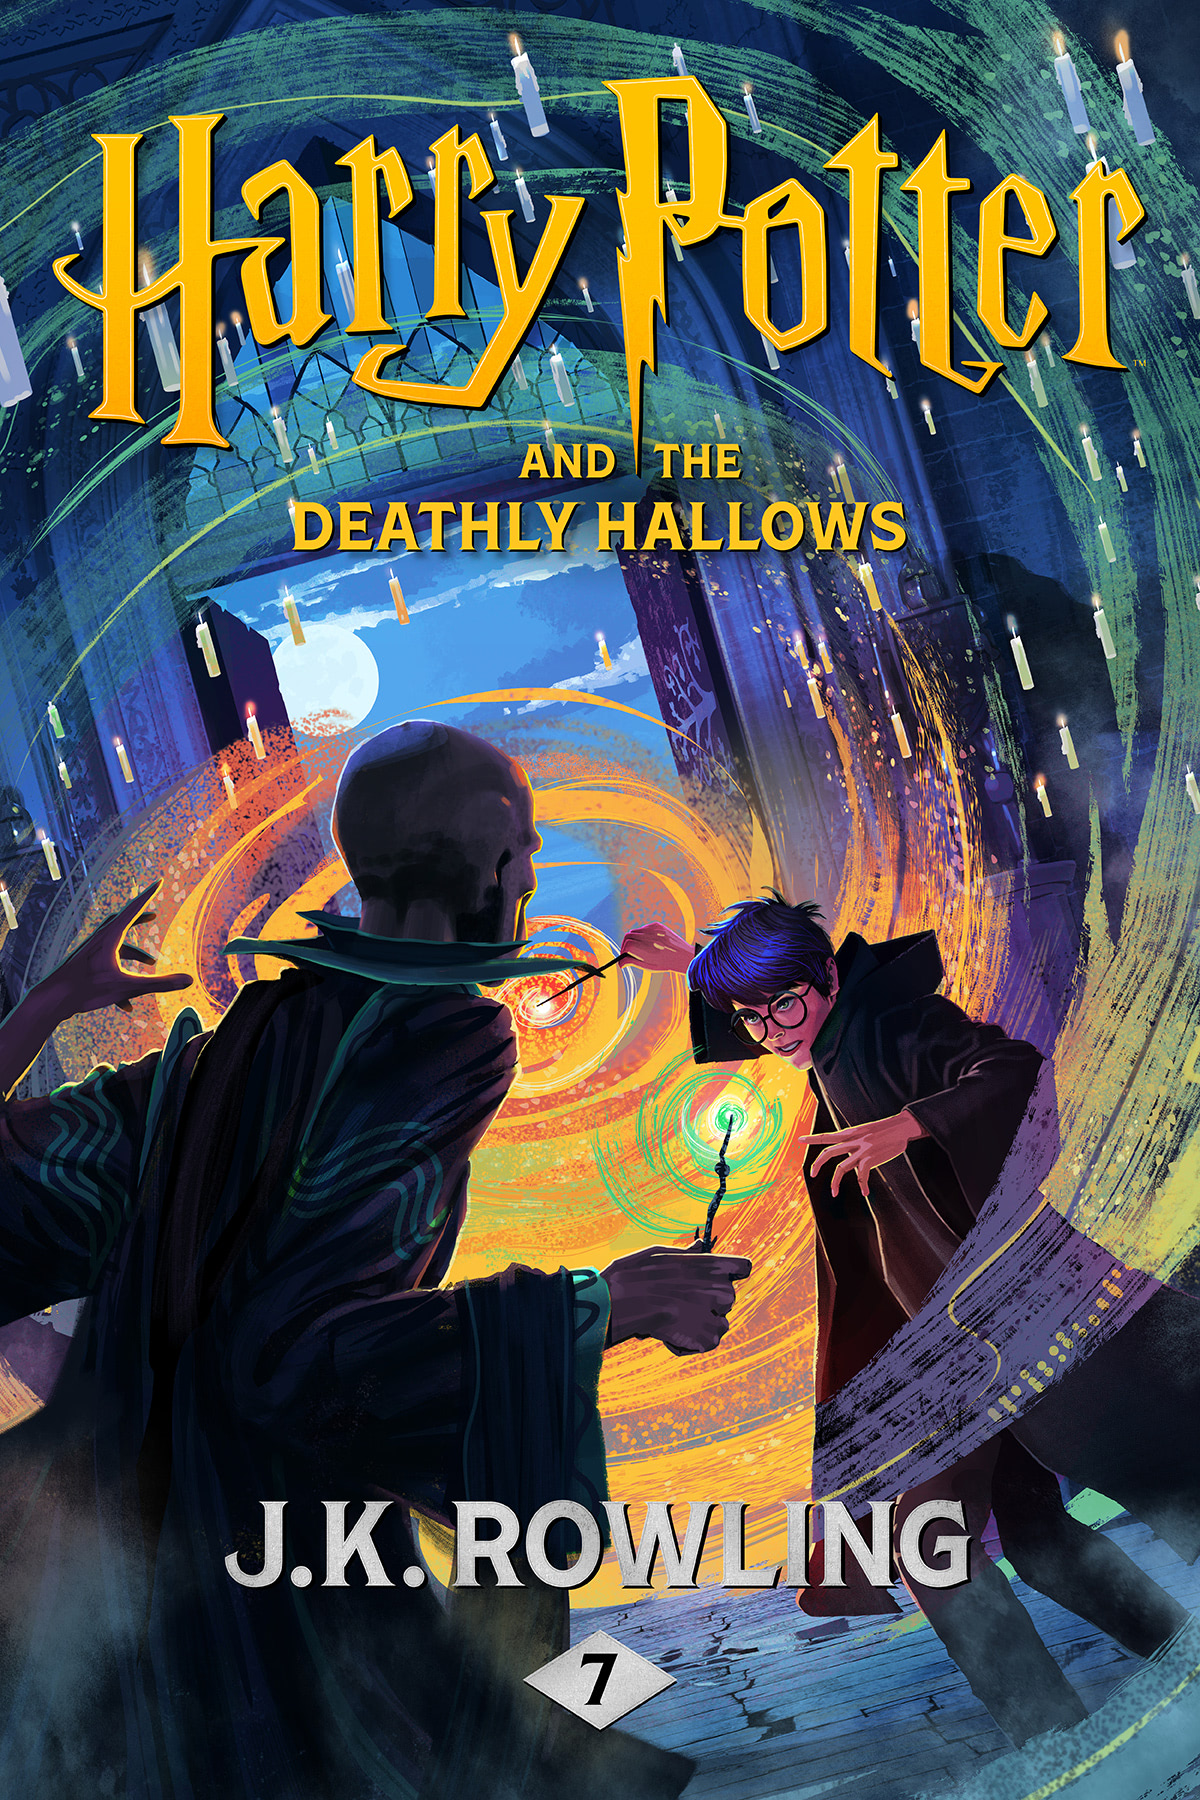 ‘Deathly Hallows’ 2022 Pottermore eBook/audiobook cover